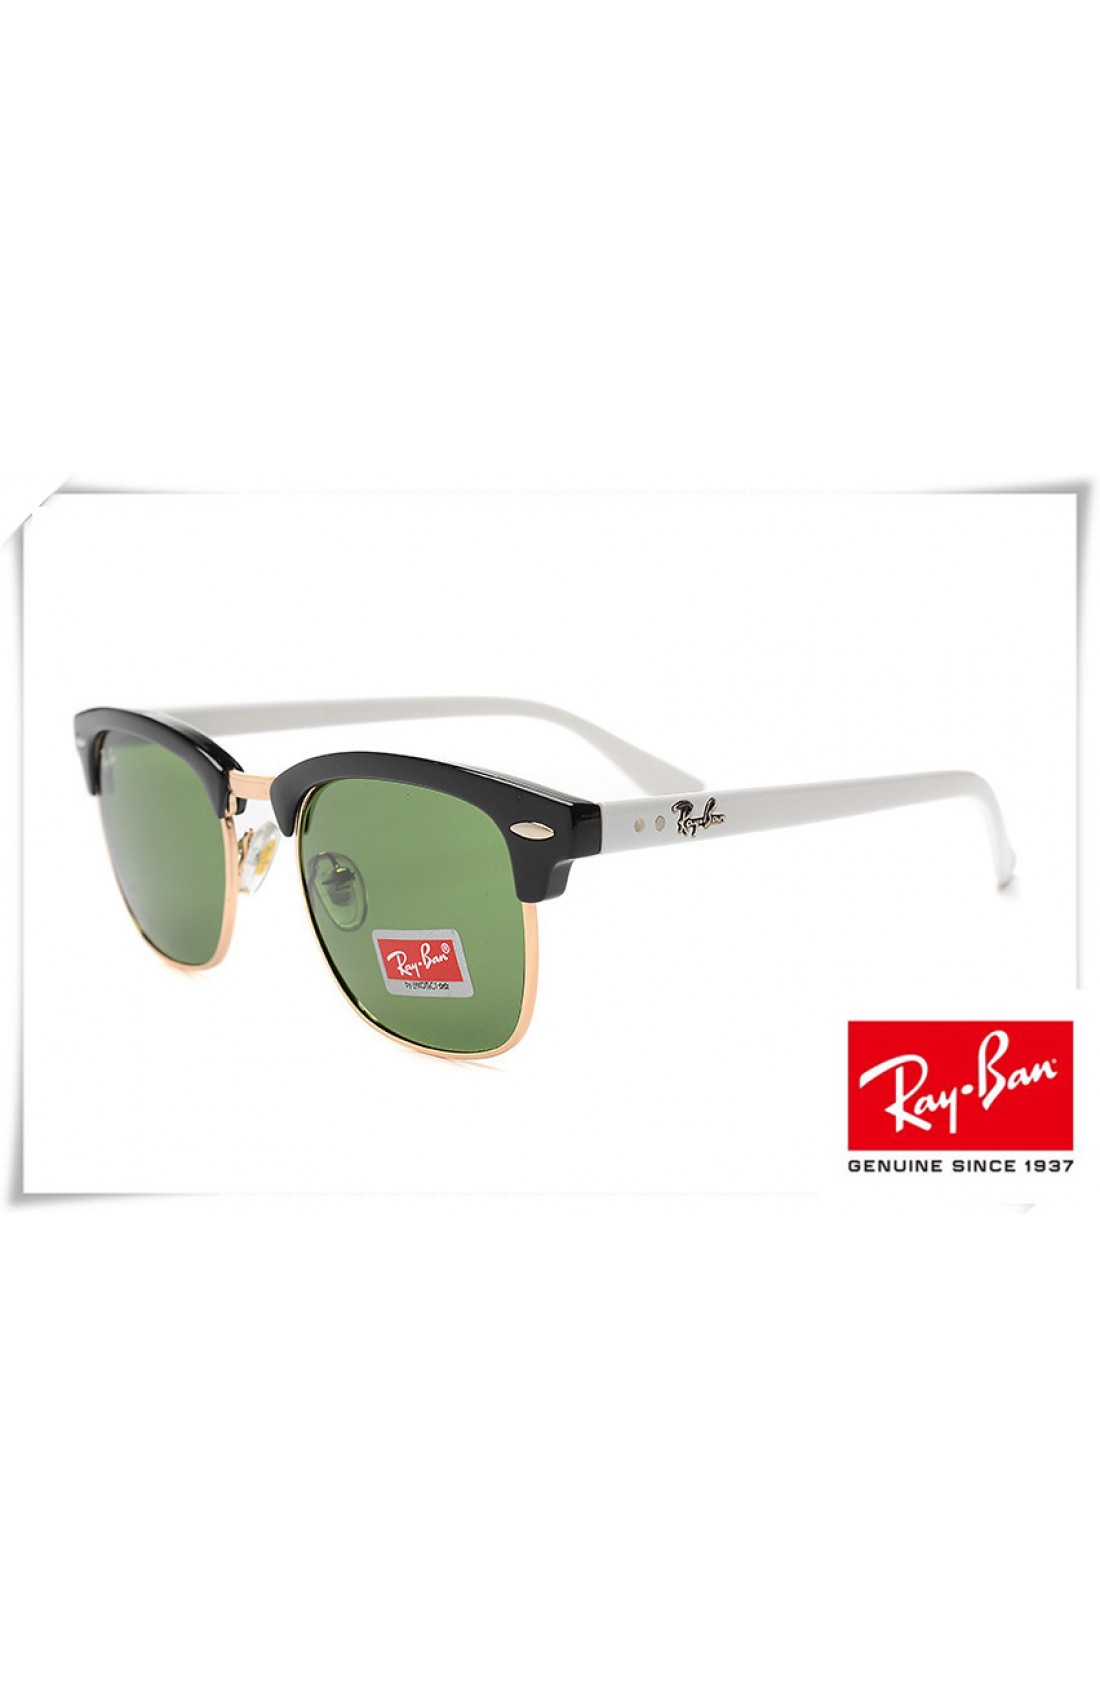 Fake Ray RB3016 Clubmaster Sunglasses Frame Green Lens Outlet